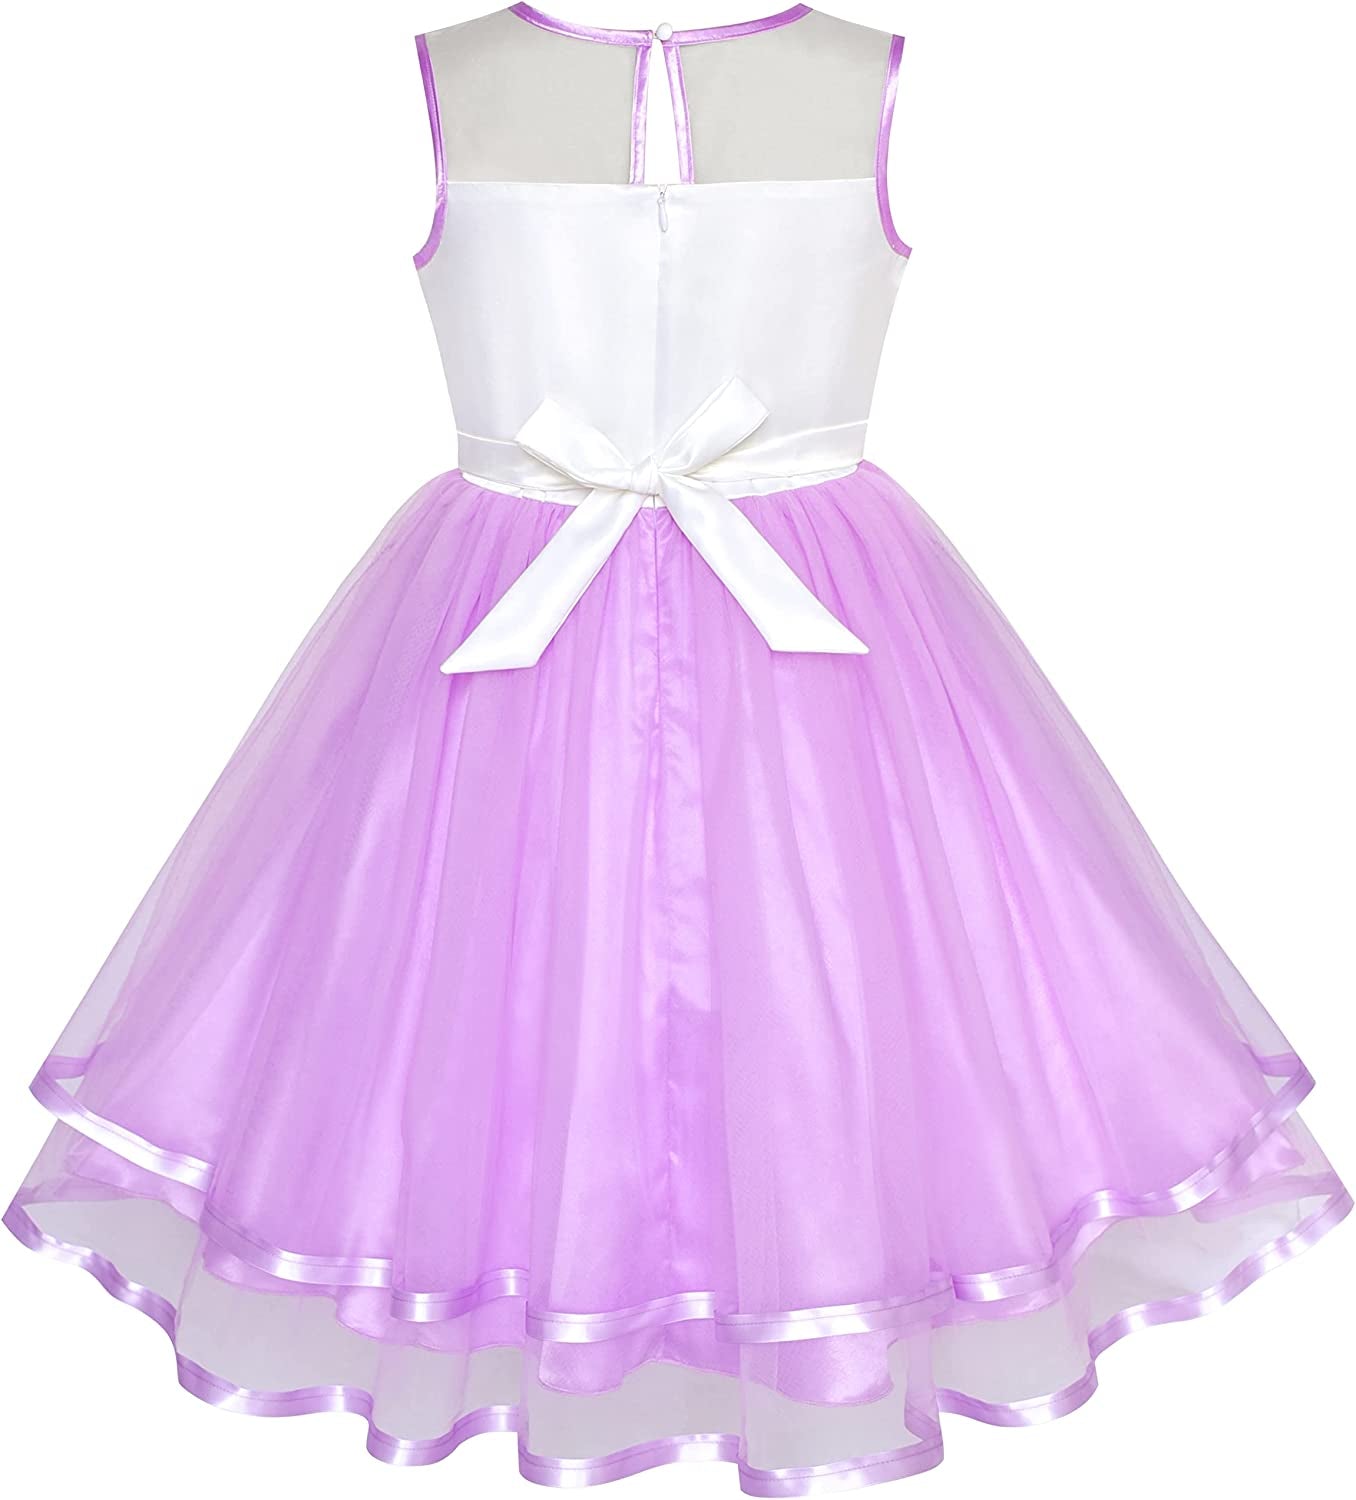 Blue Satin and Tulle Flower Girls Dress (Size 4-12)